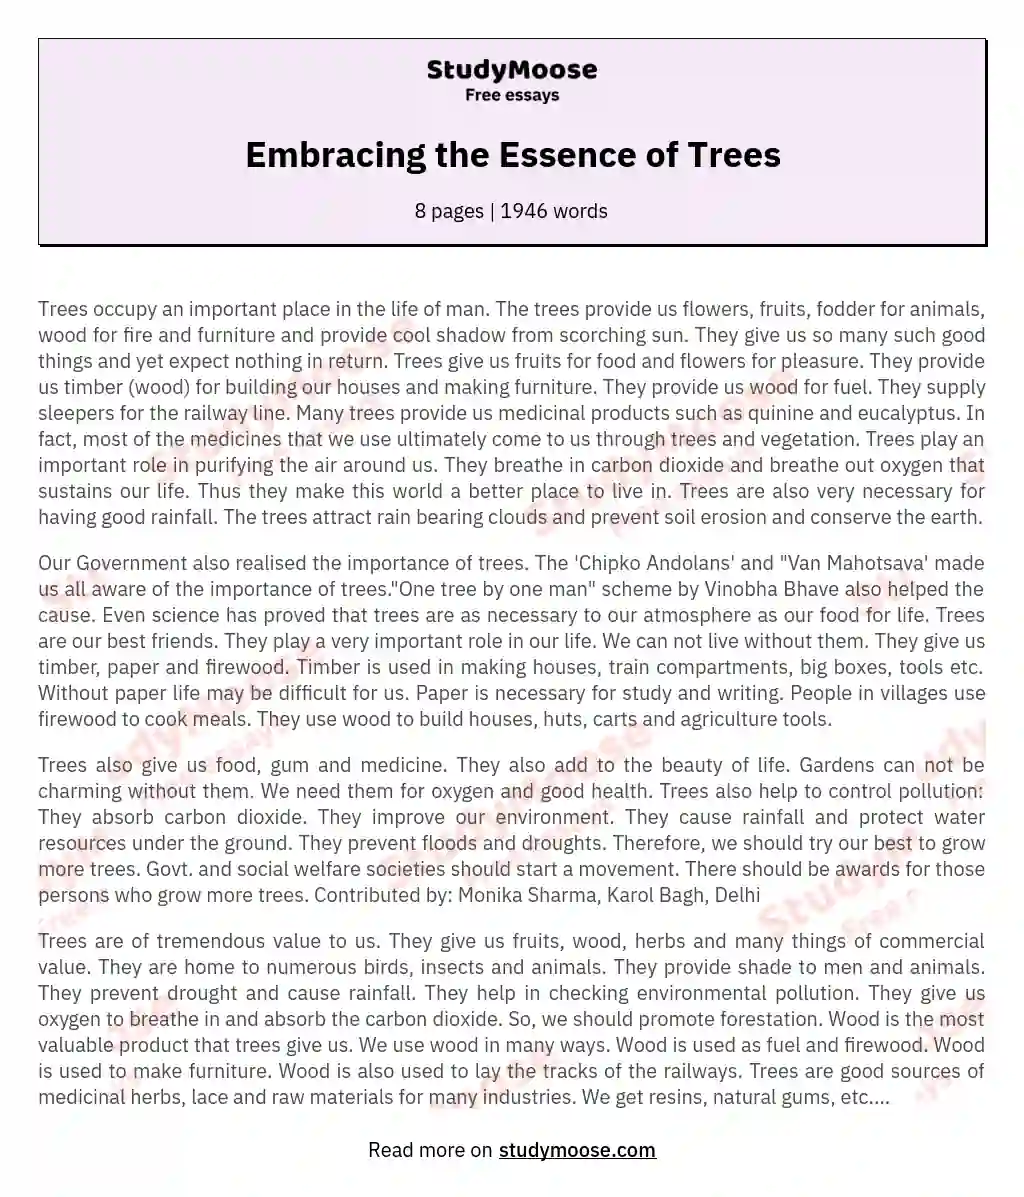 Embracing the Essence of Trees essay